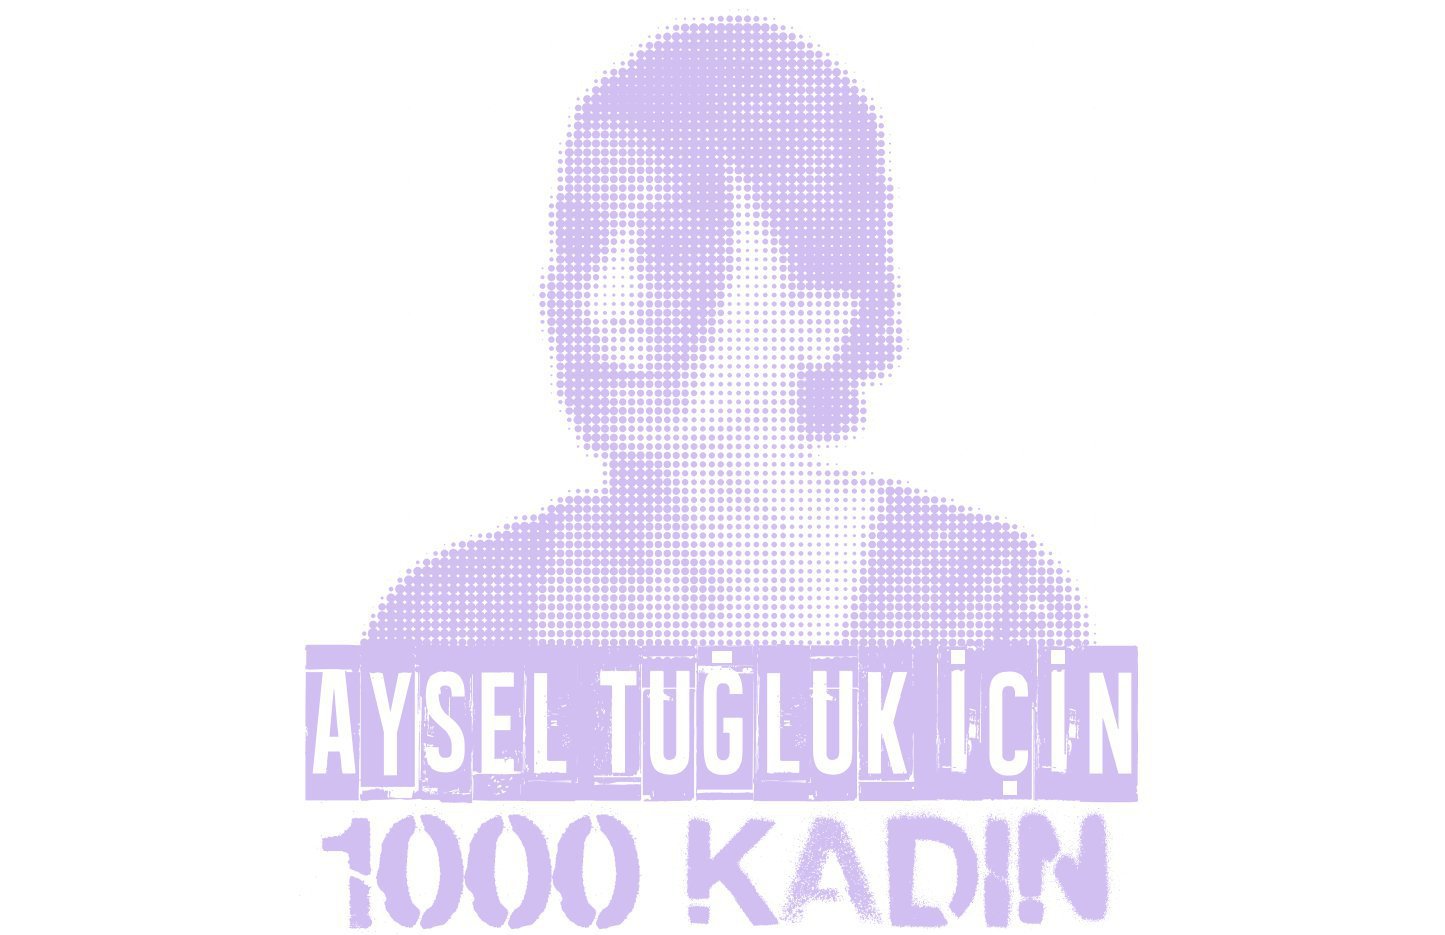 Number of women calling for Aysel Tuğluk's freedom tops 5 thousand